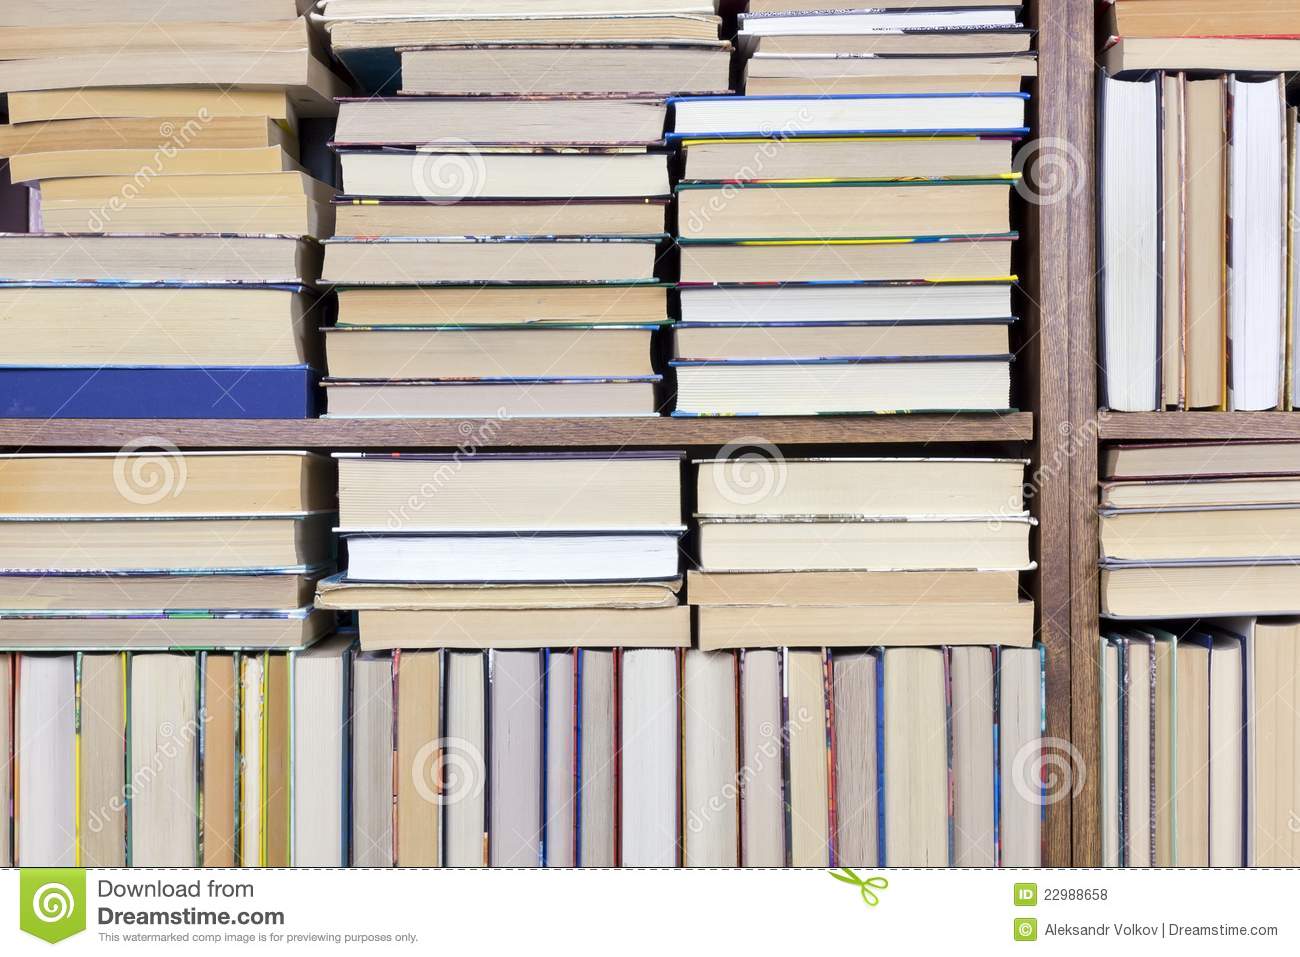 Old Books On A Shelf Background Royalty Free Stock Photos   Image